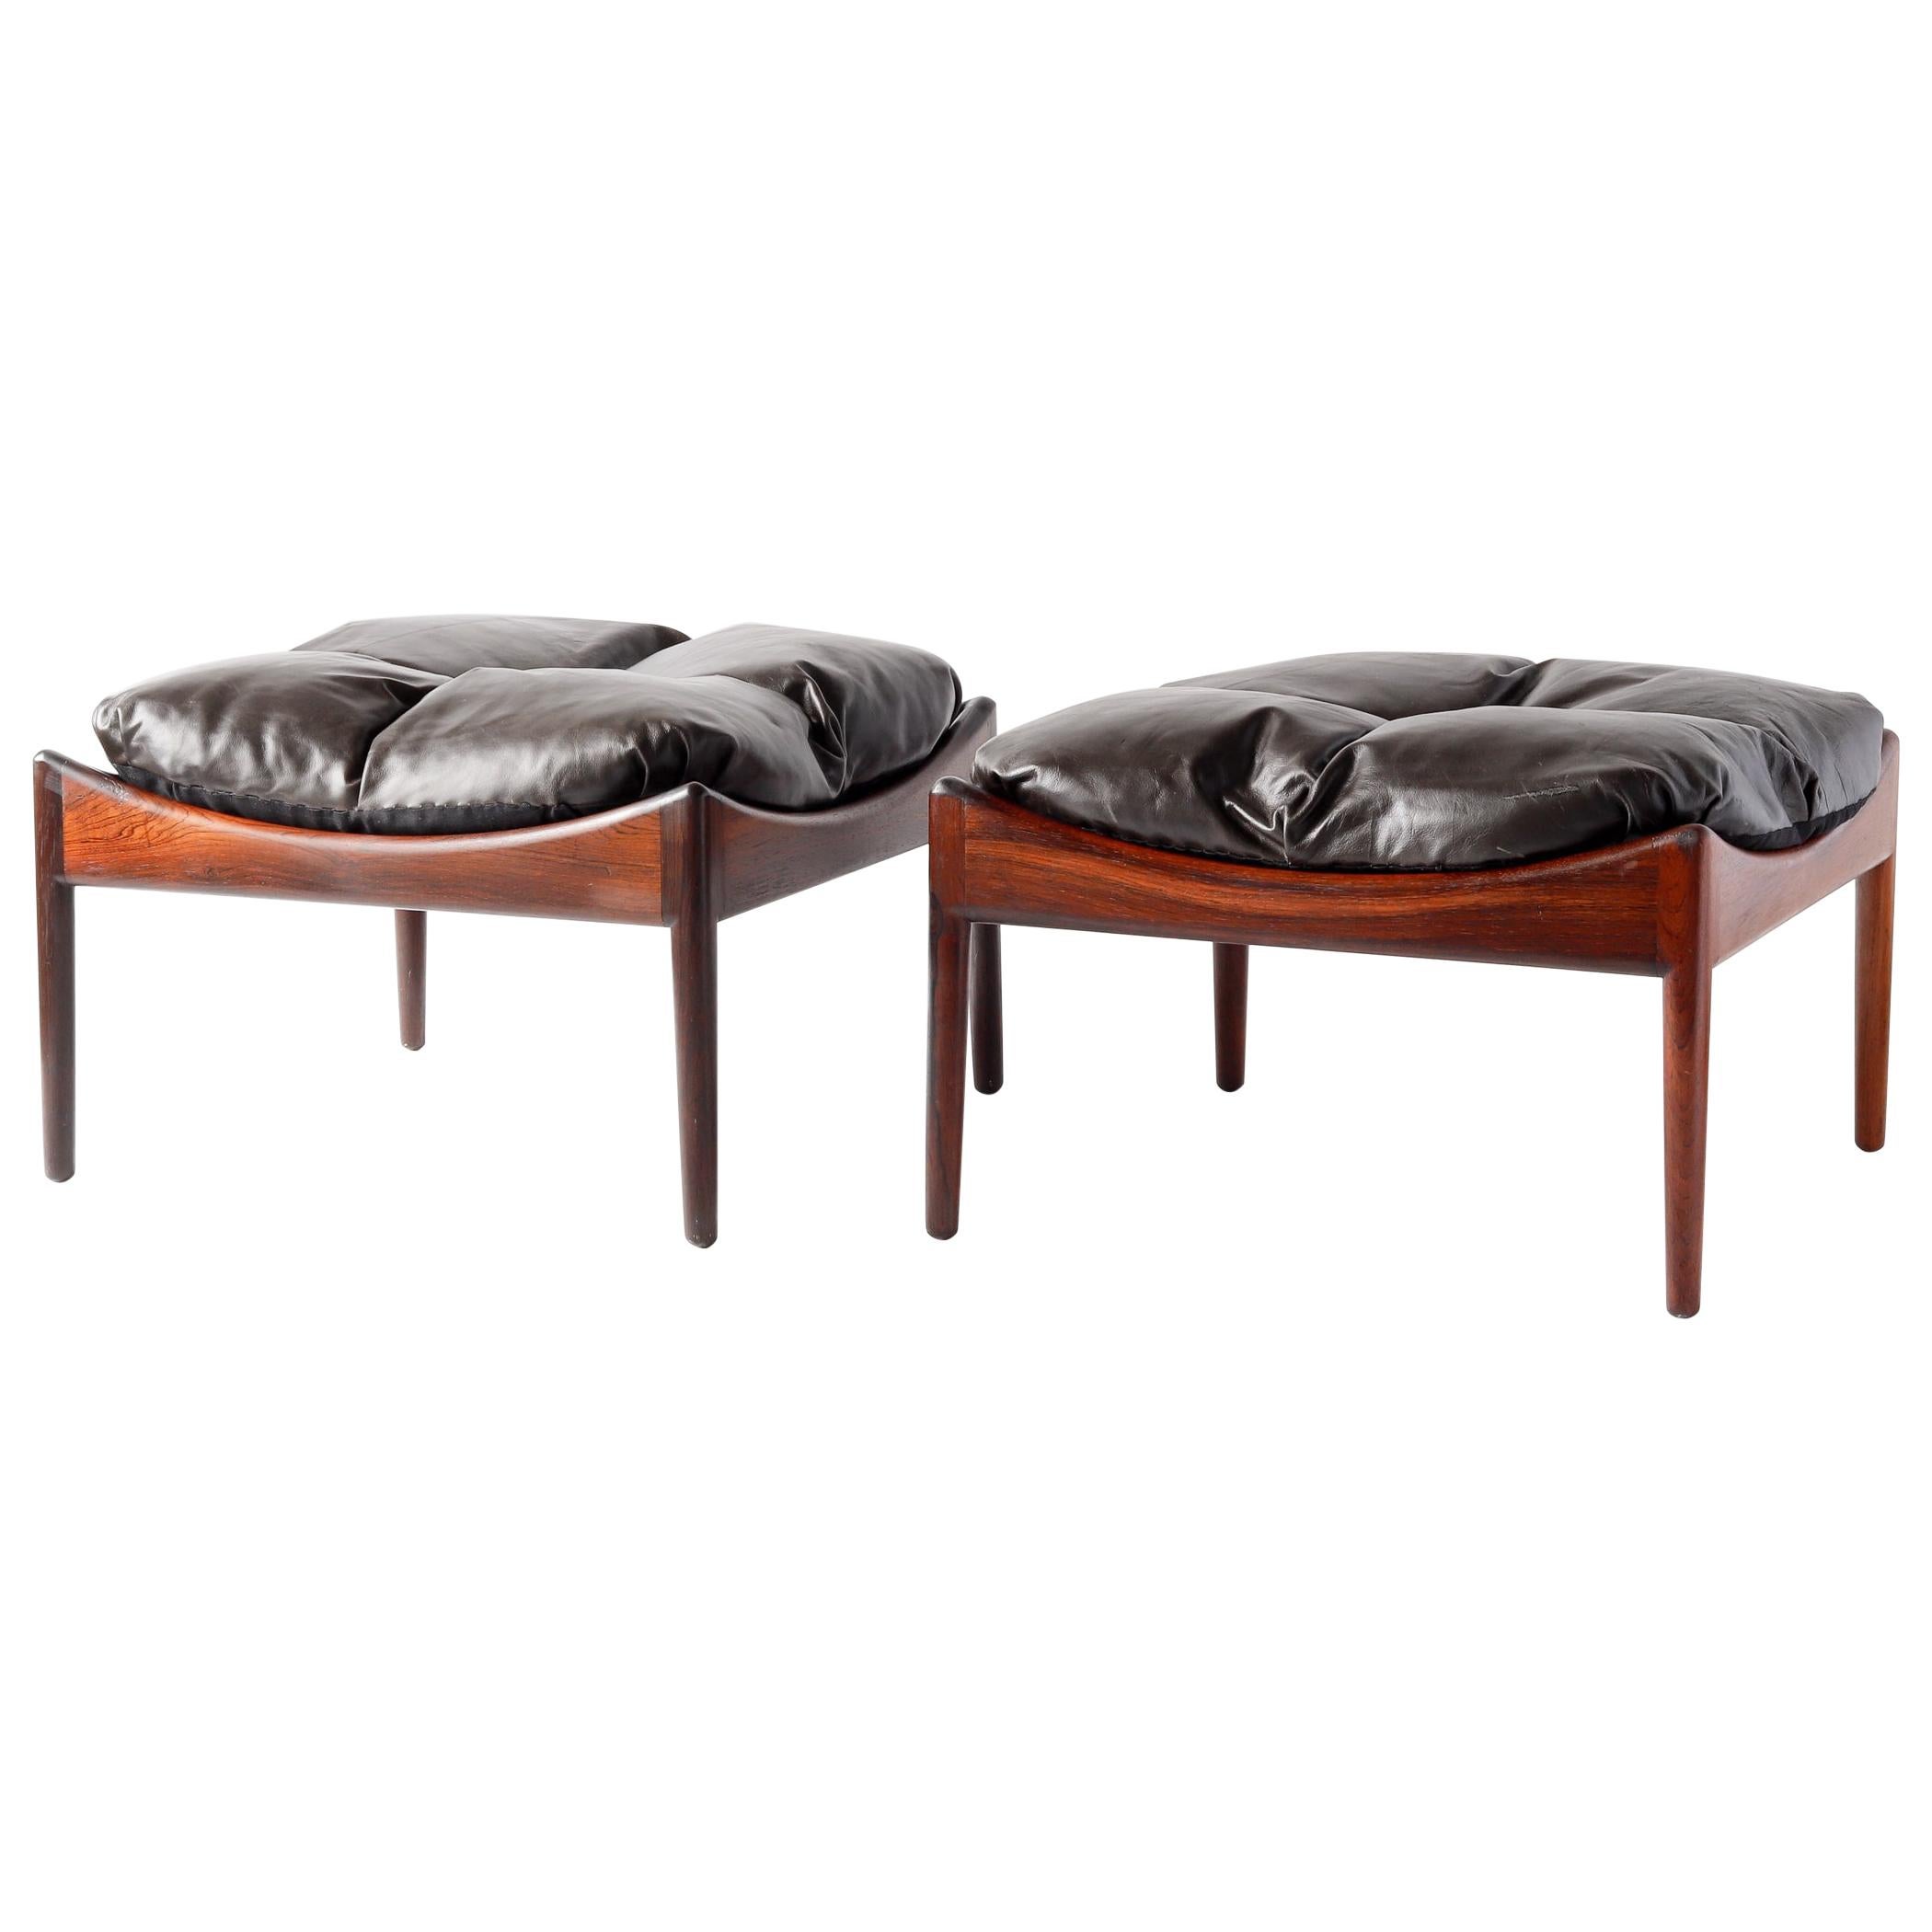 Pair of Kristian Vedel Rosewood Modus Ottomans with Brown Leather Upholstery  For Sale